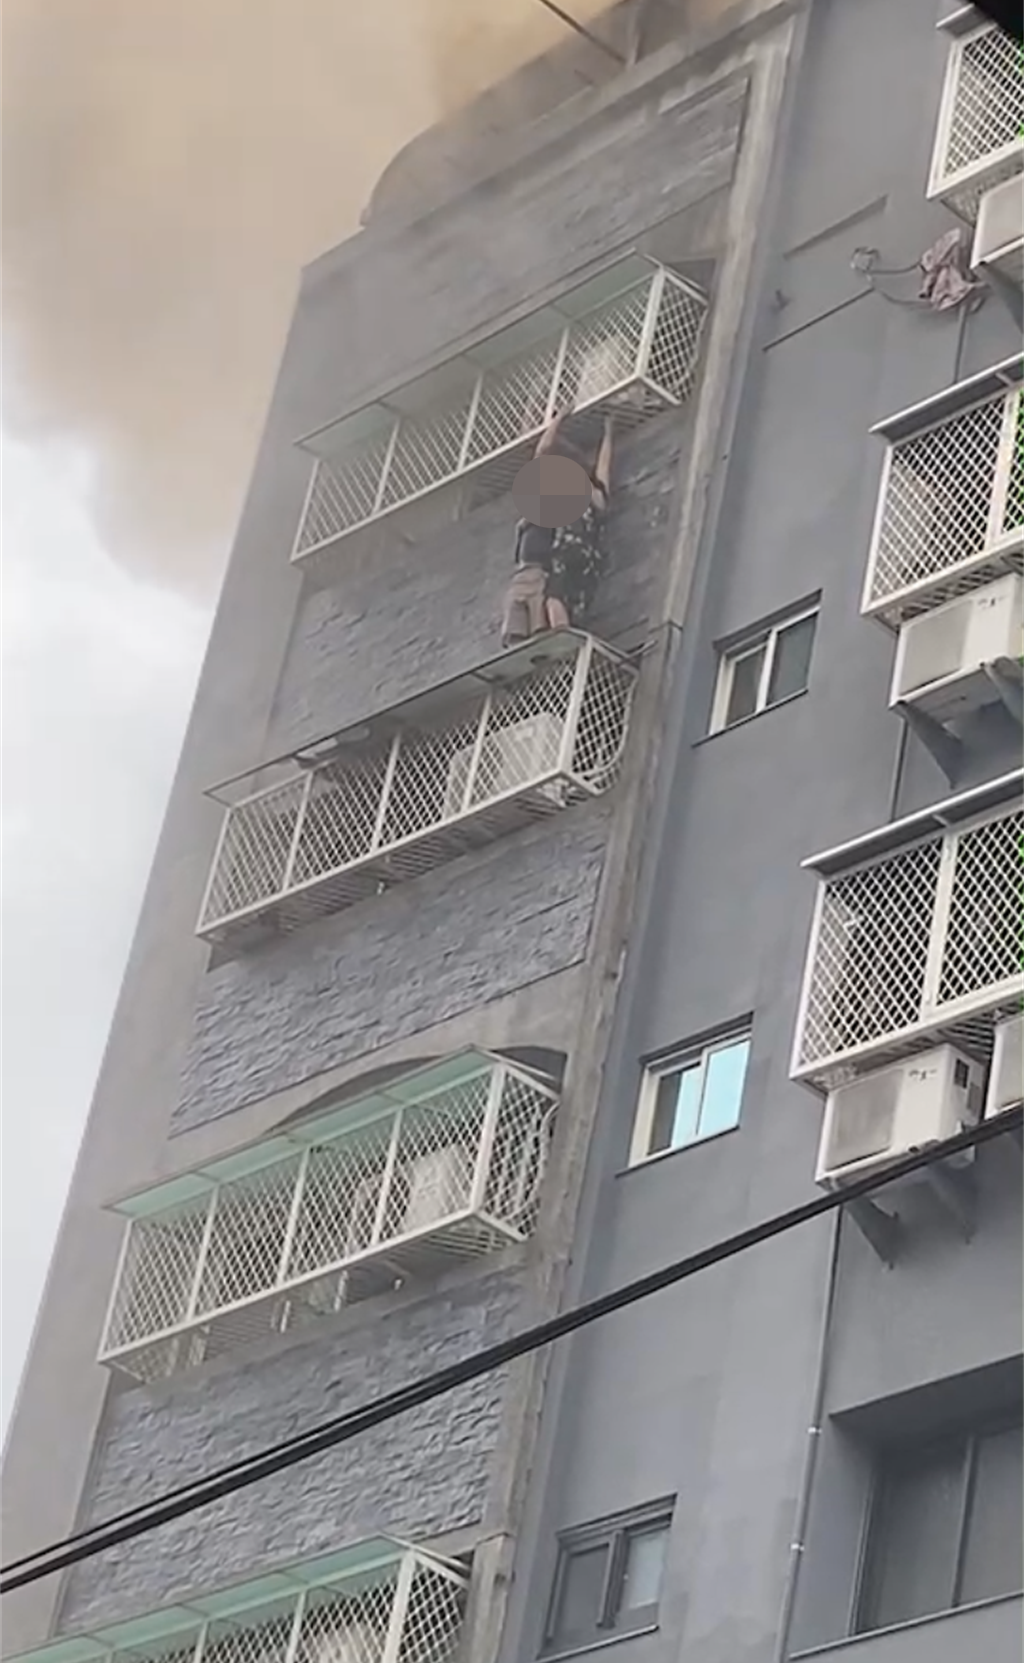 Video shows residents rescued from burning building in central Taiwan